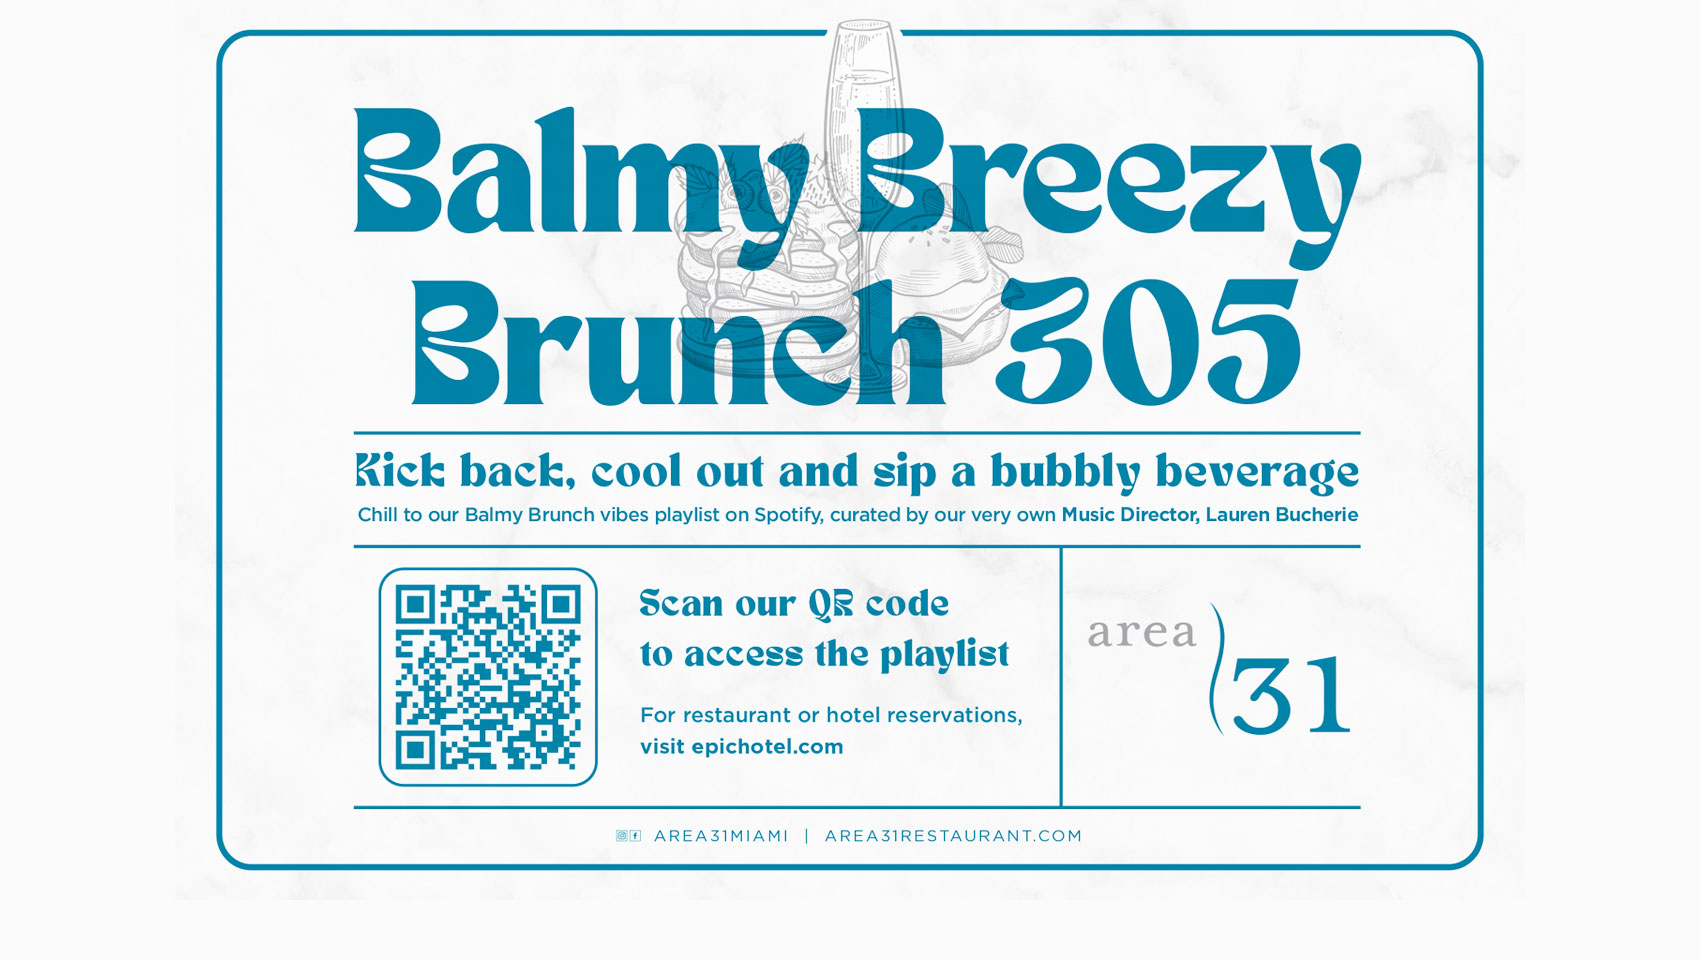 event poster with QR code for Balmy Breezy Lunch 305